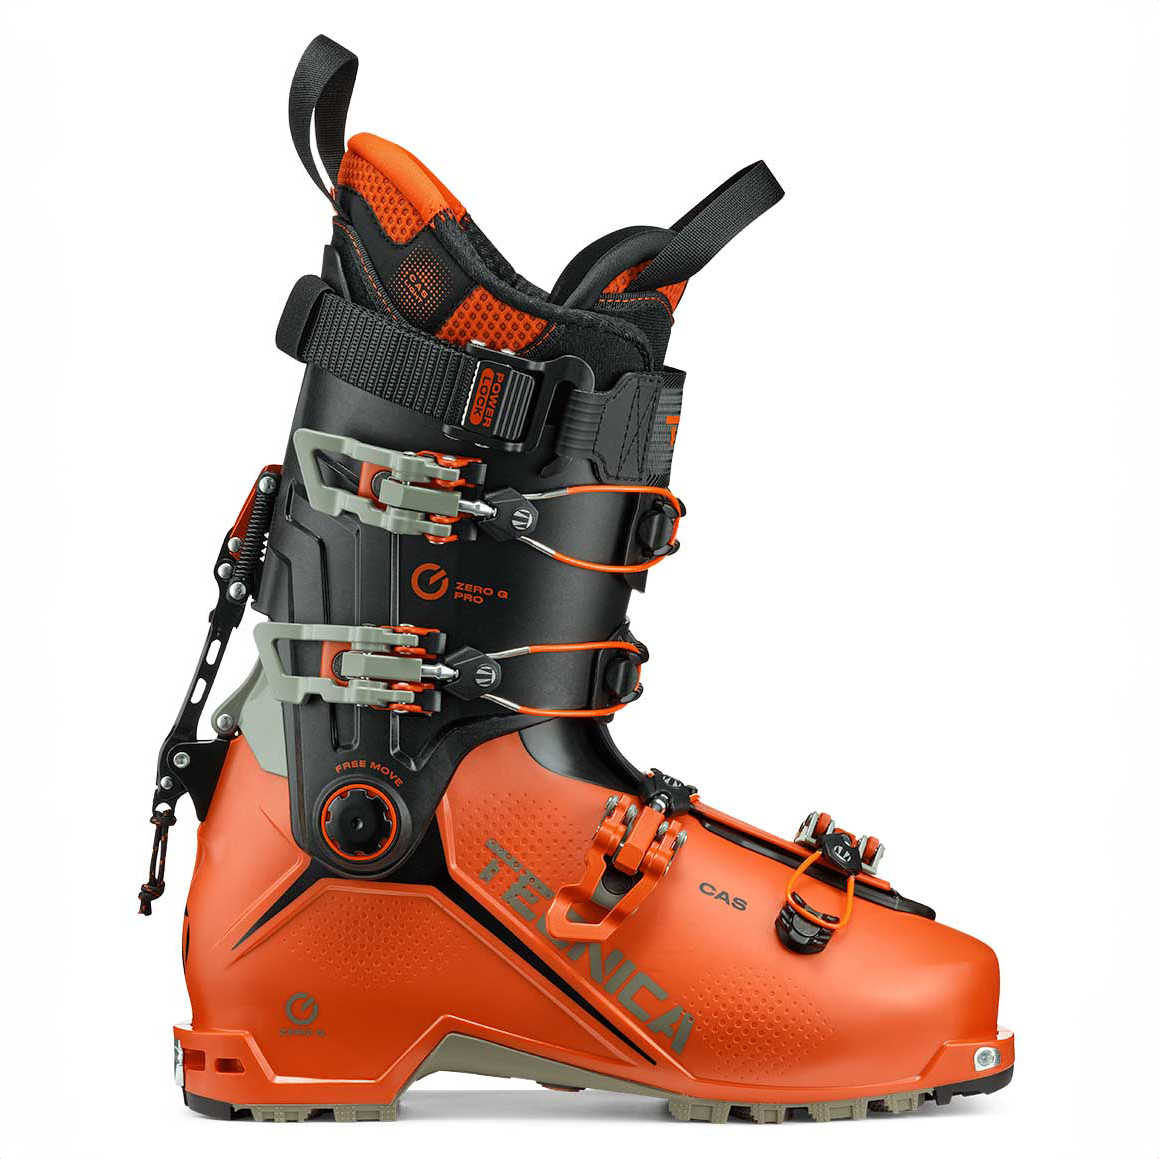 The new Zero G Tour Pro boot from Tecnica